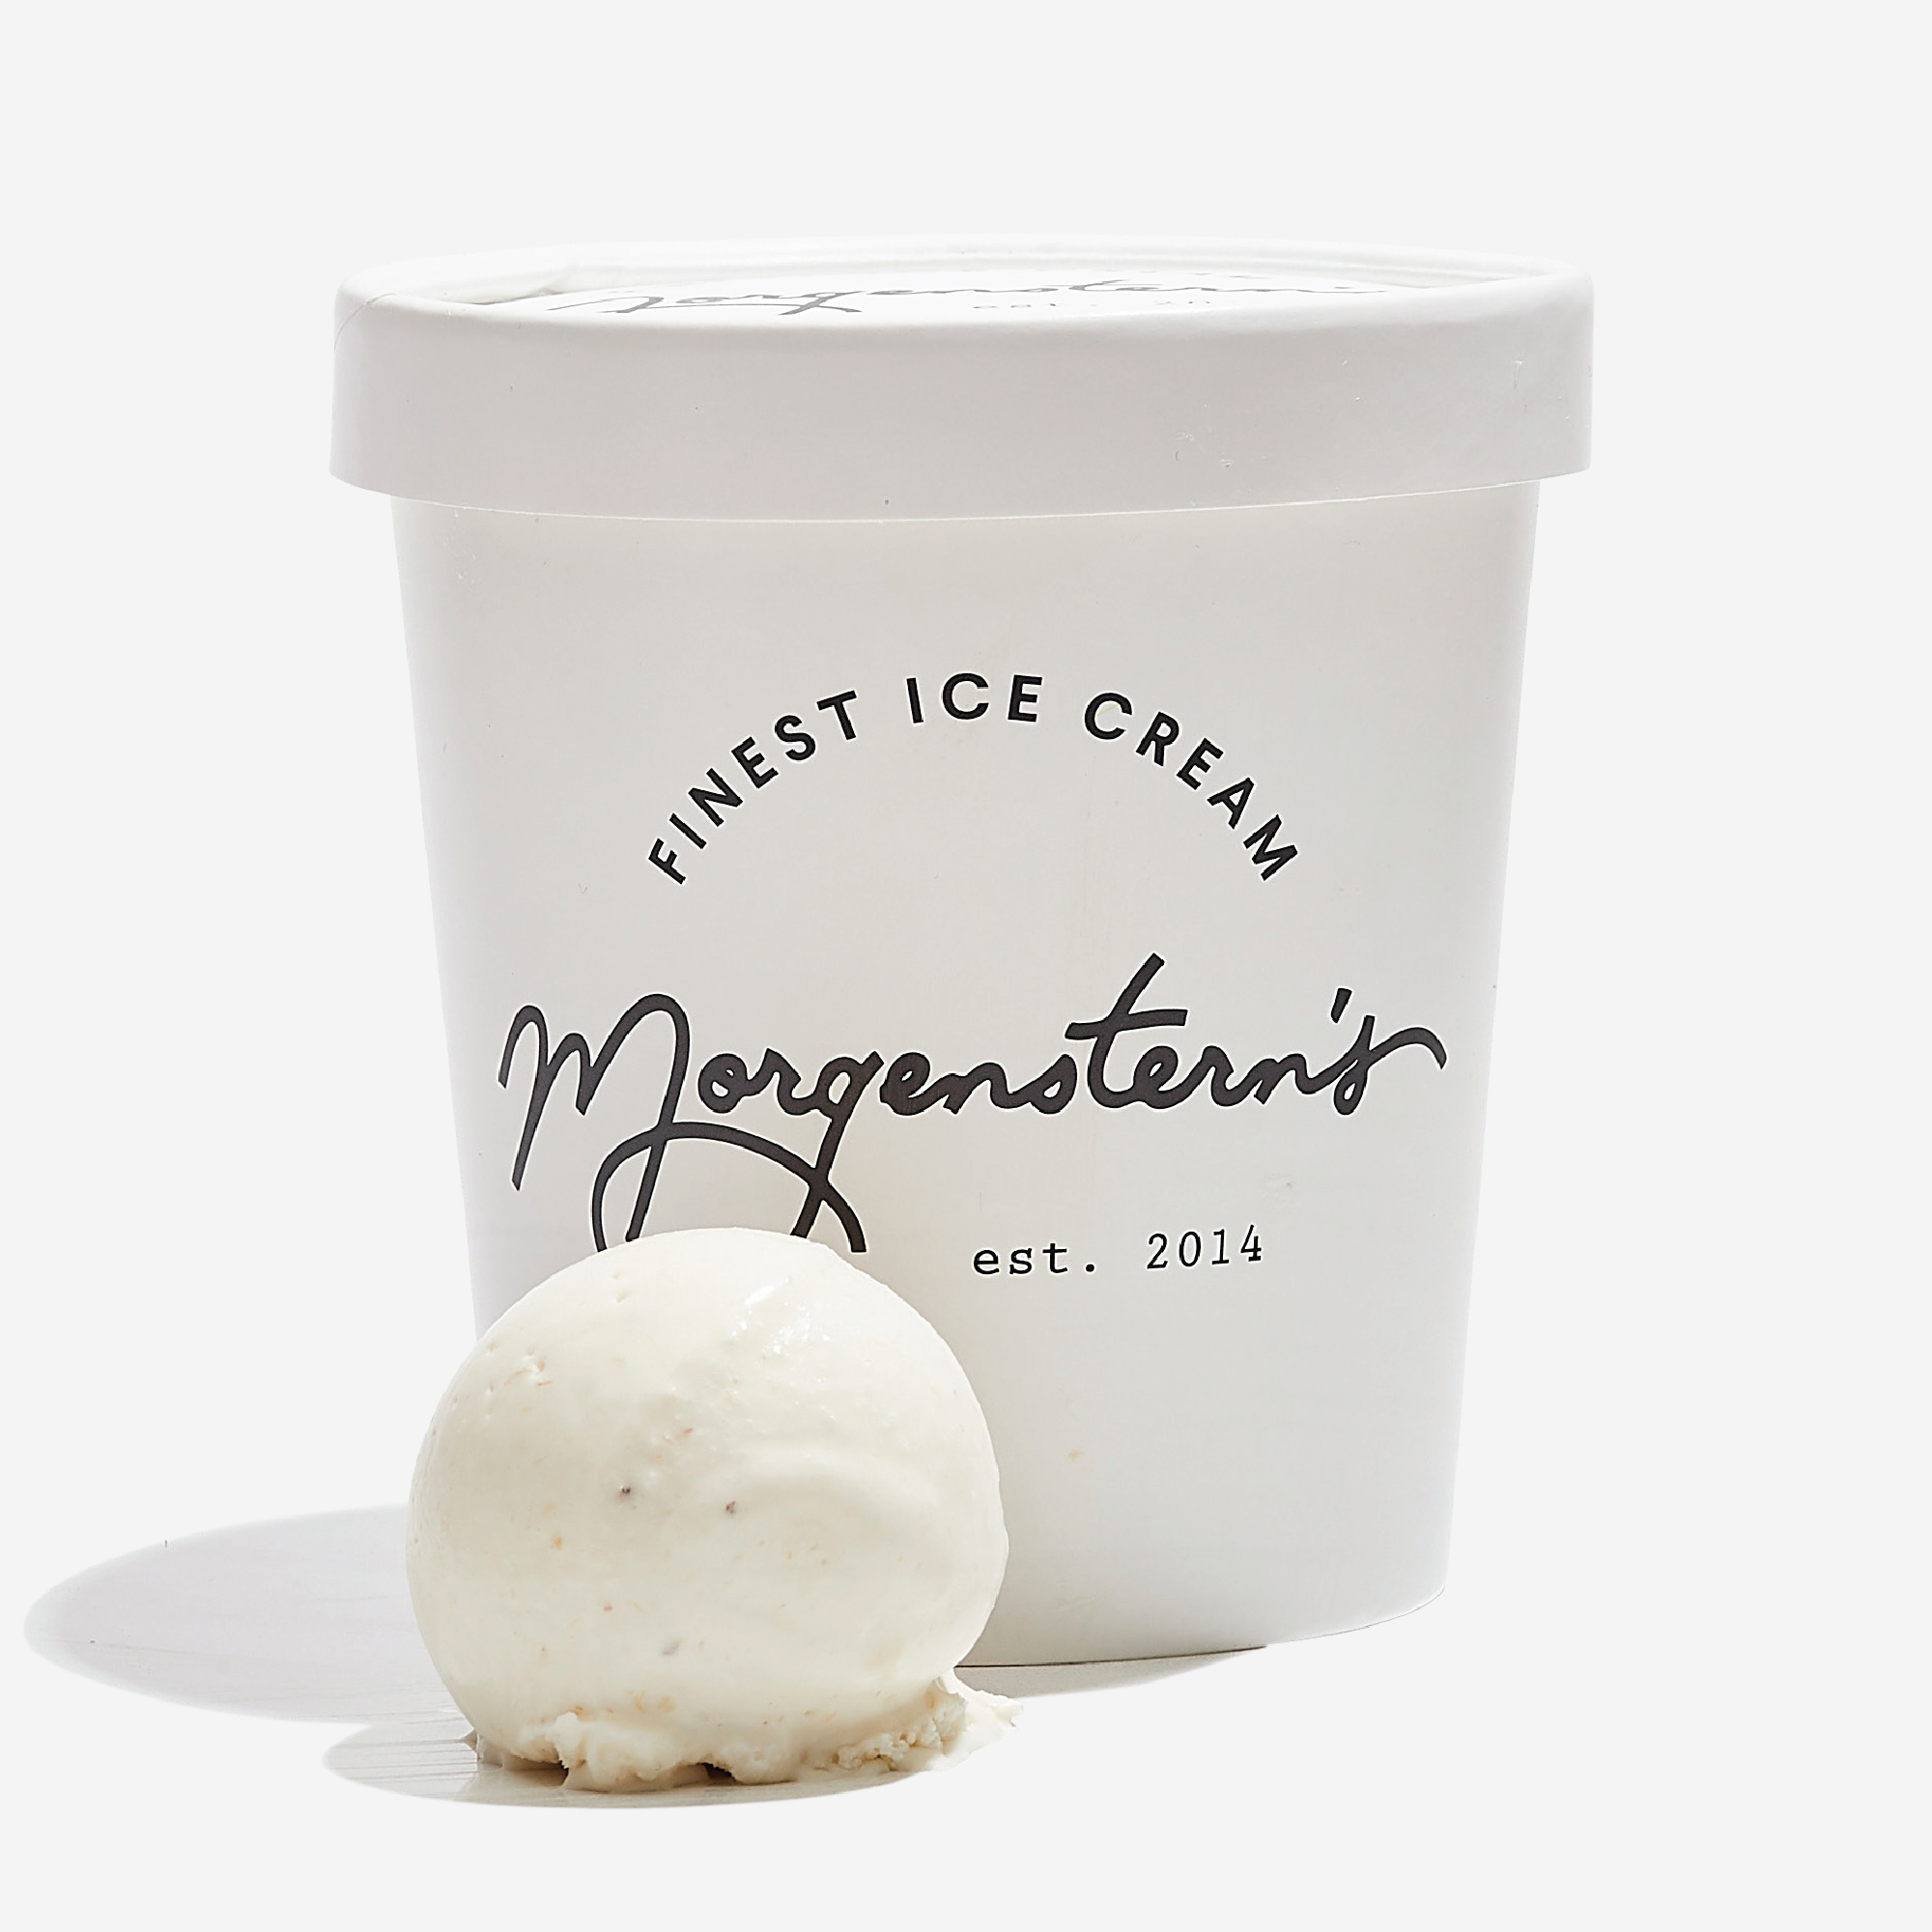 ▷ ice cream designed by Morgenstern's Finest Ice Cream 🍦 Stop by